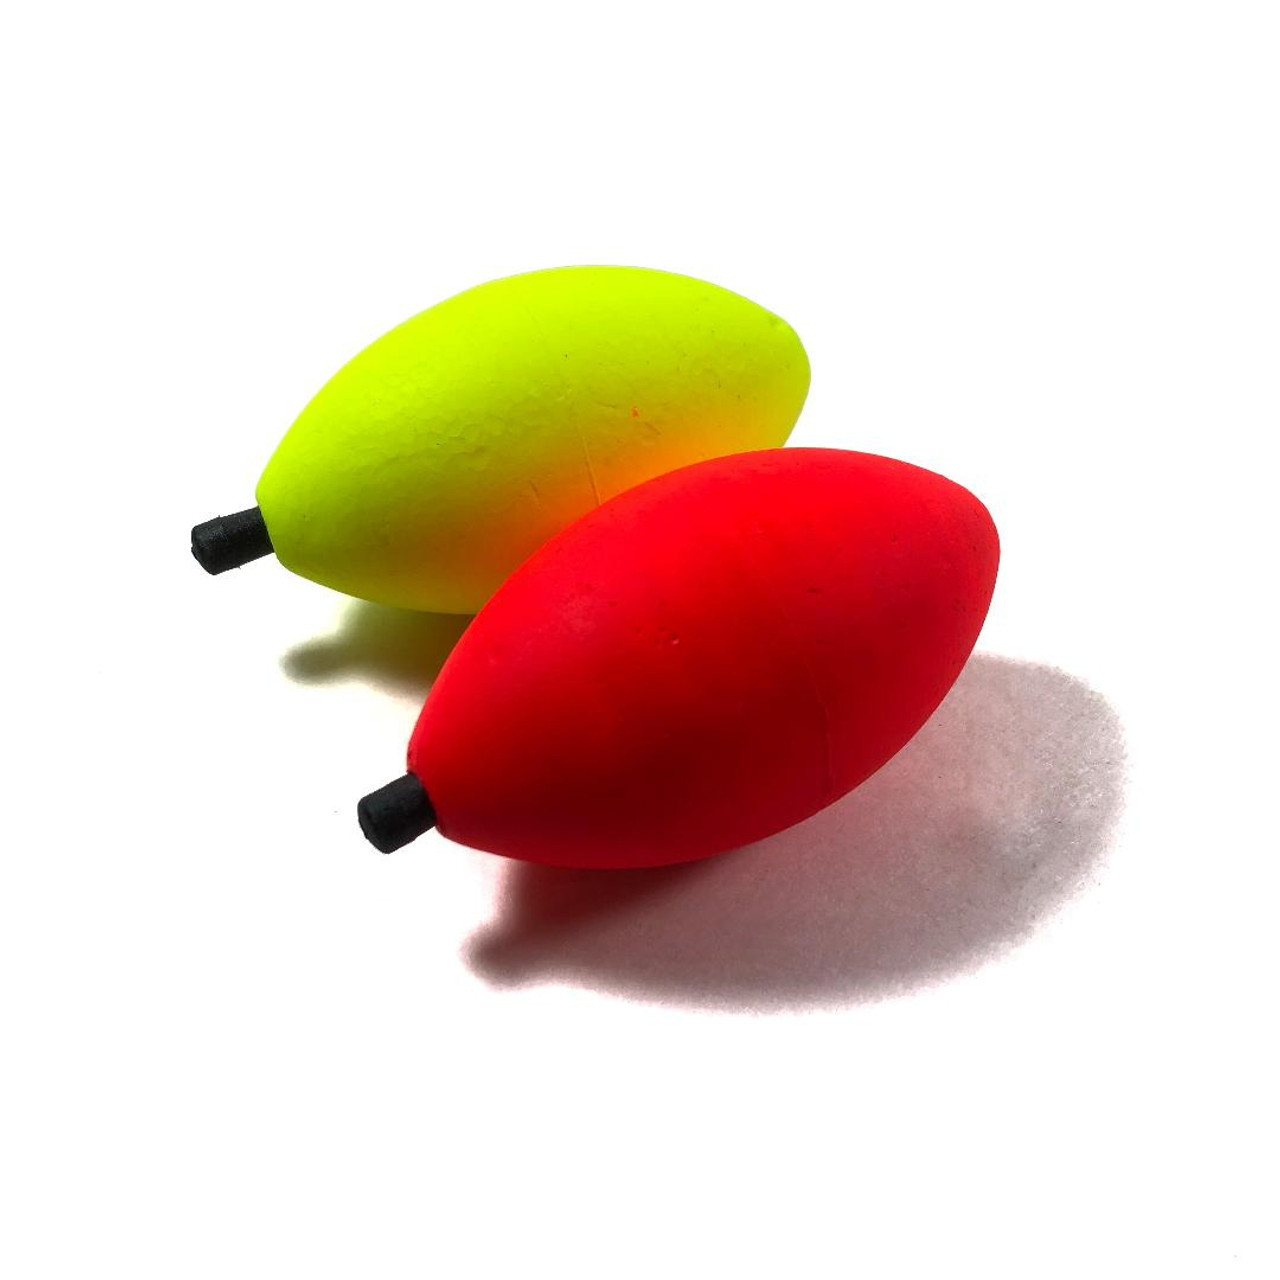 1 / 2″ Chartreuse Floats